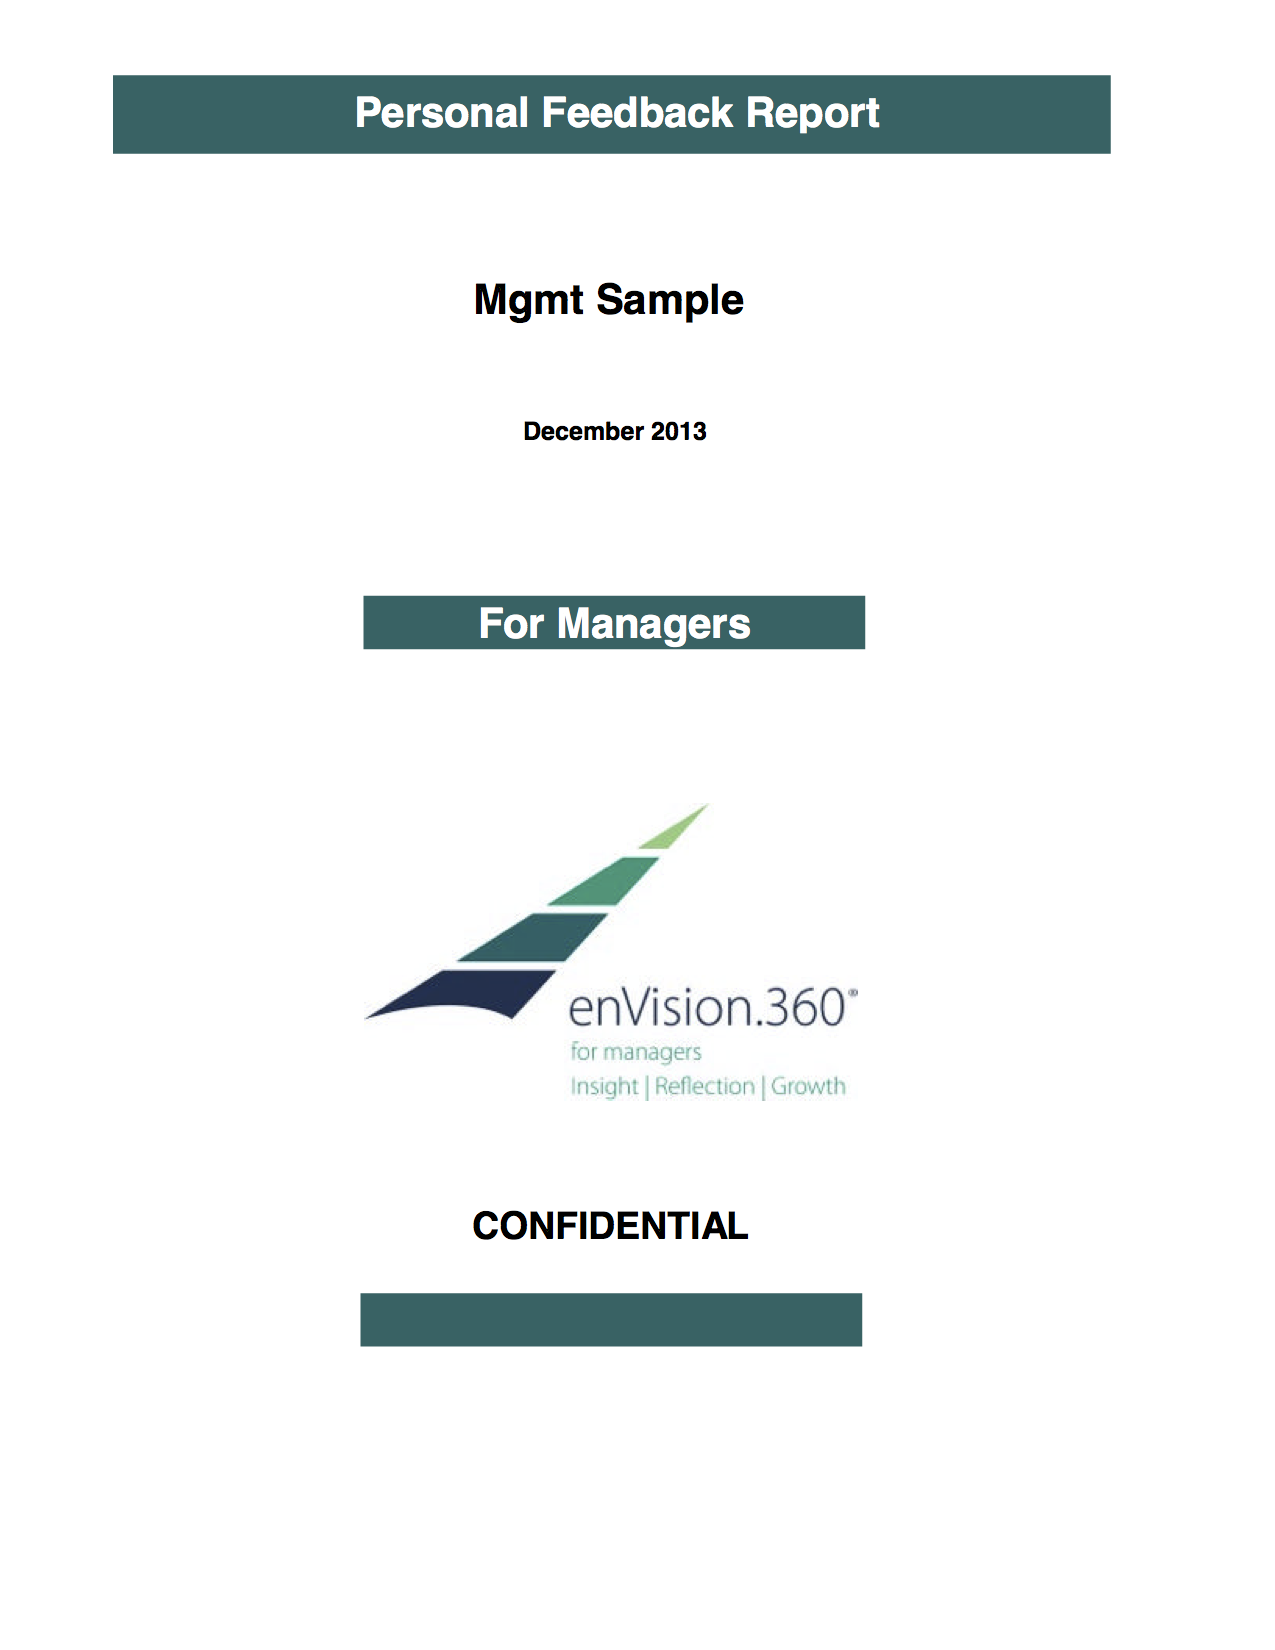 enVision.360 Sample Manager Report